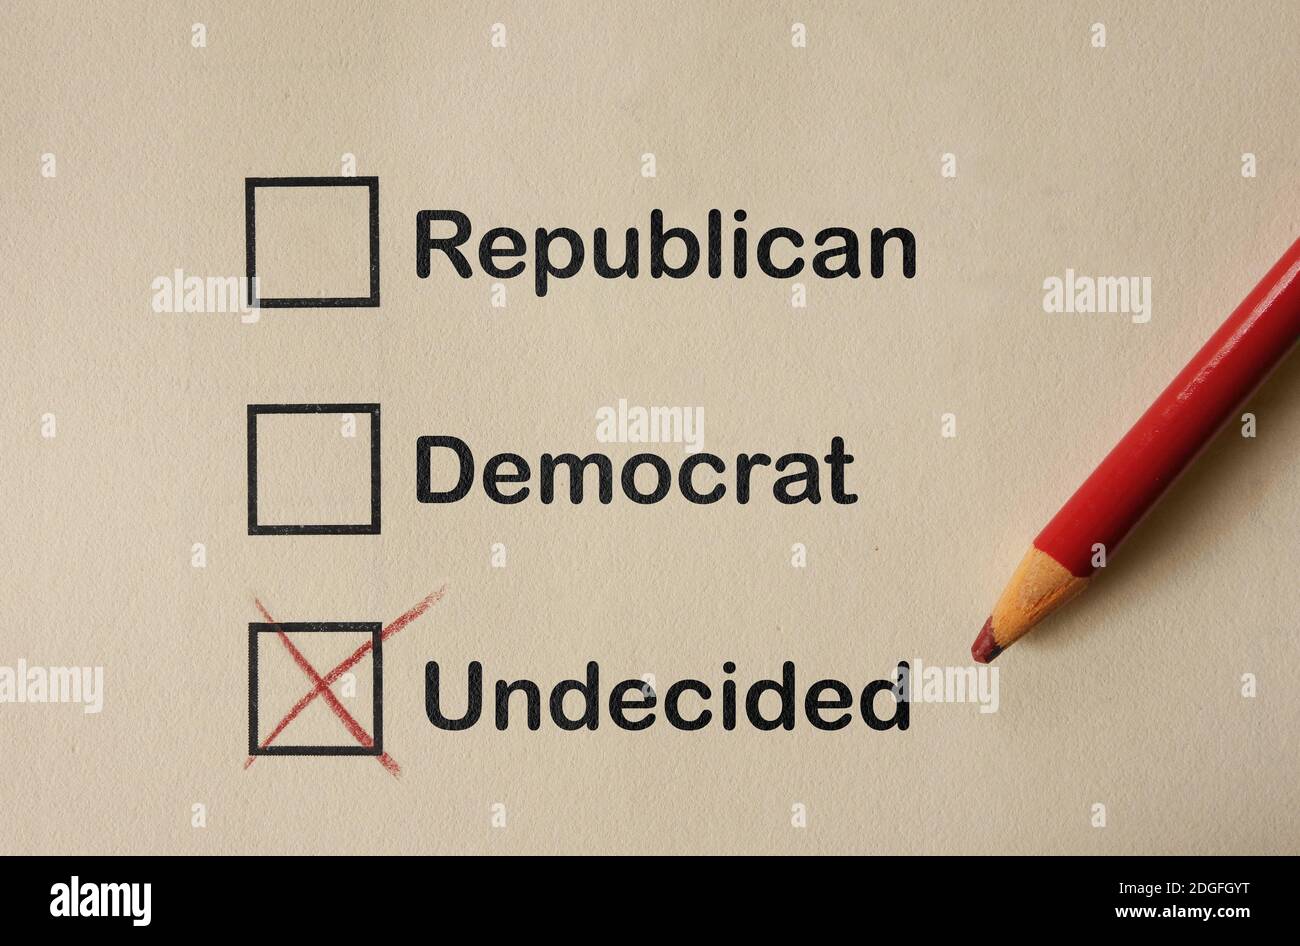 Undecided voter concept Stock Photo